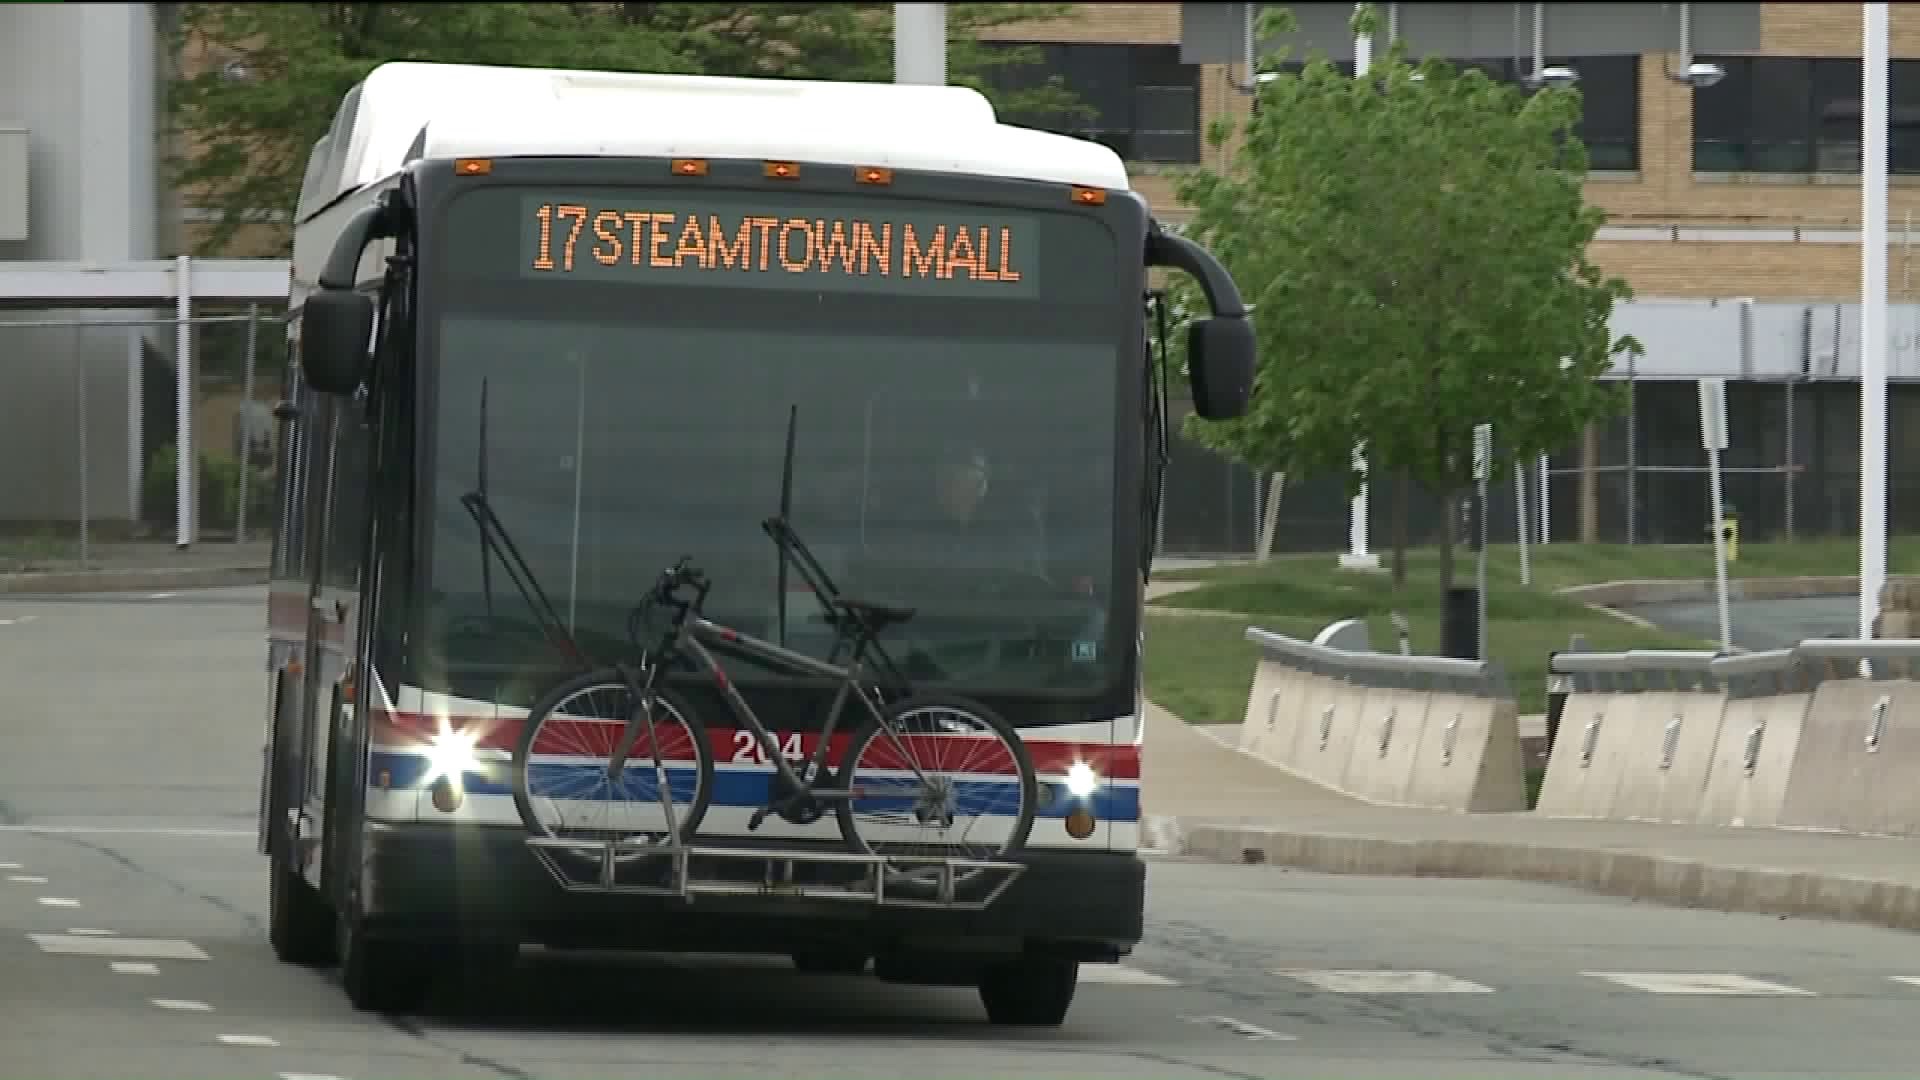 LCTA Adds Bus Routes to Airport